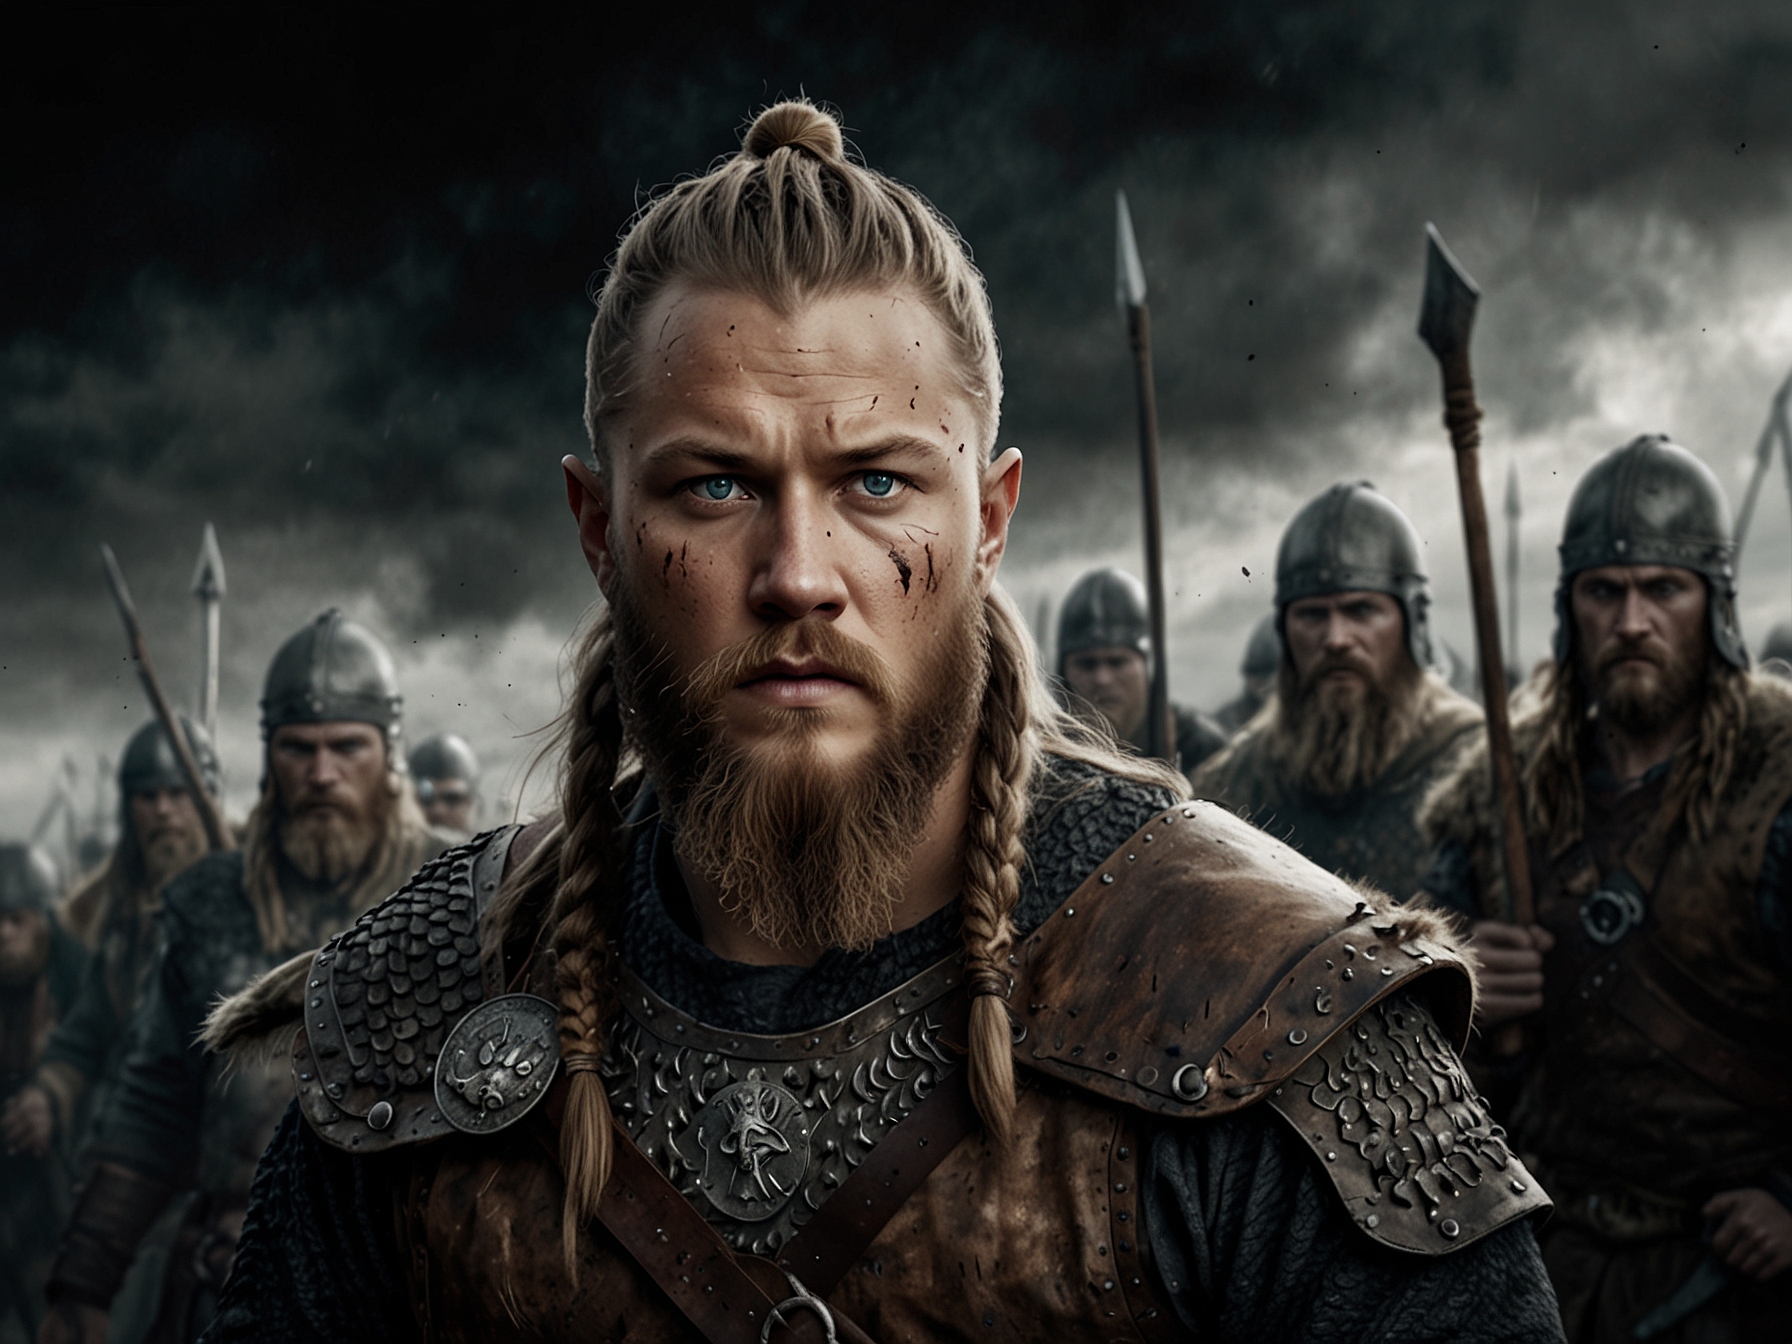 A high-definition image of Ragnar Lothbrok leading his Viking crew into battle, representing the intense and gritty storytelling of the 'Vikings' series.